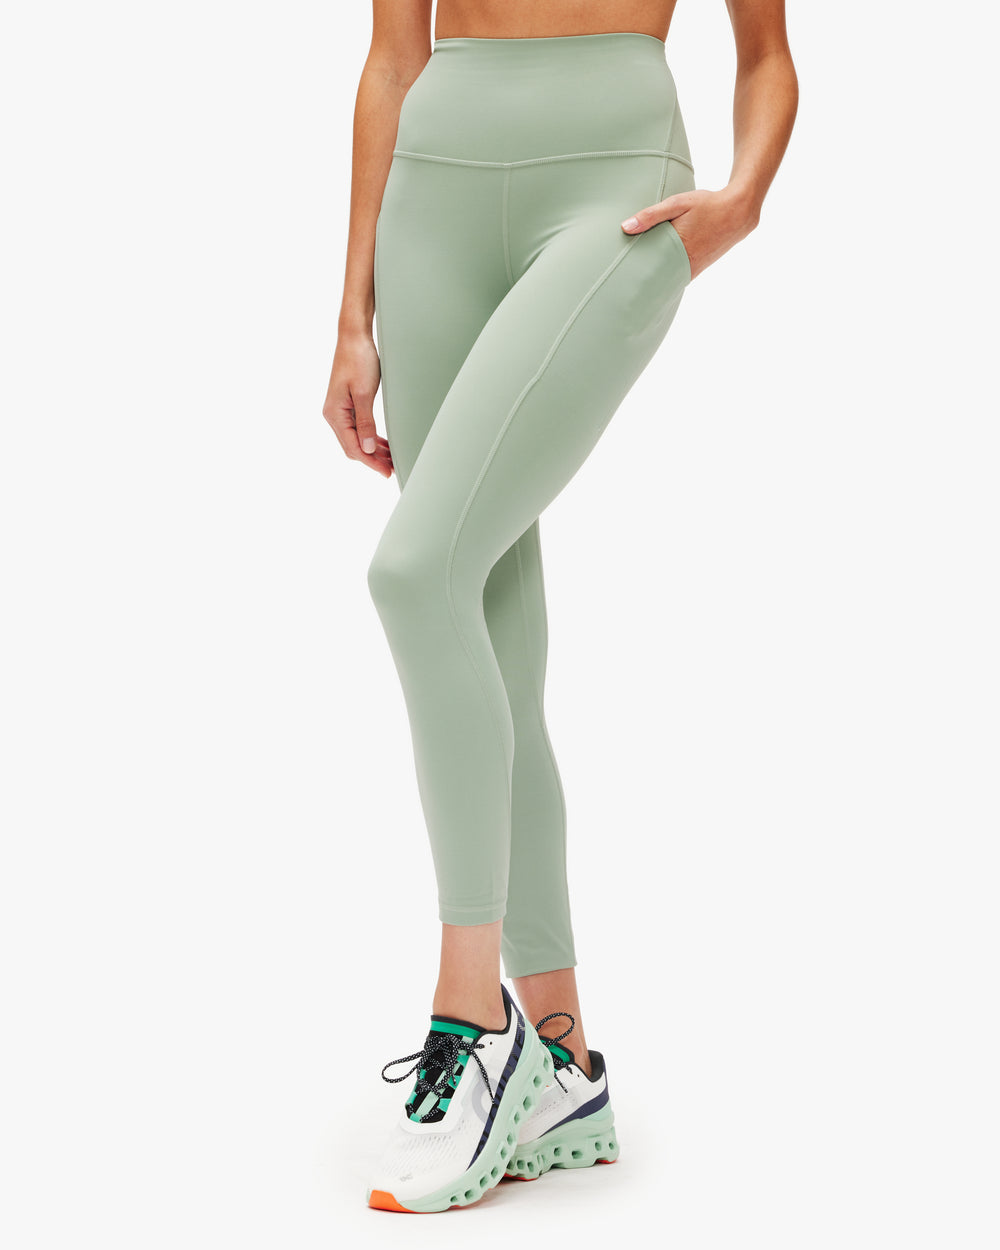 Lululemon Align High-Rise Pant 25" With Pockets